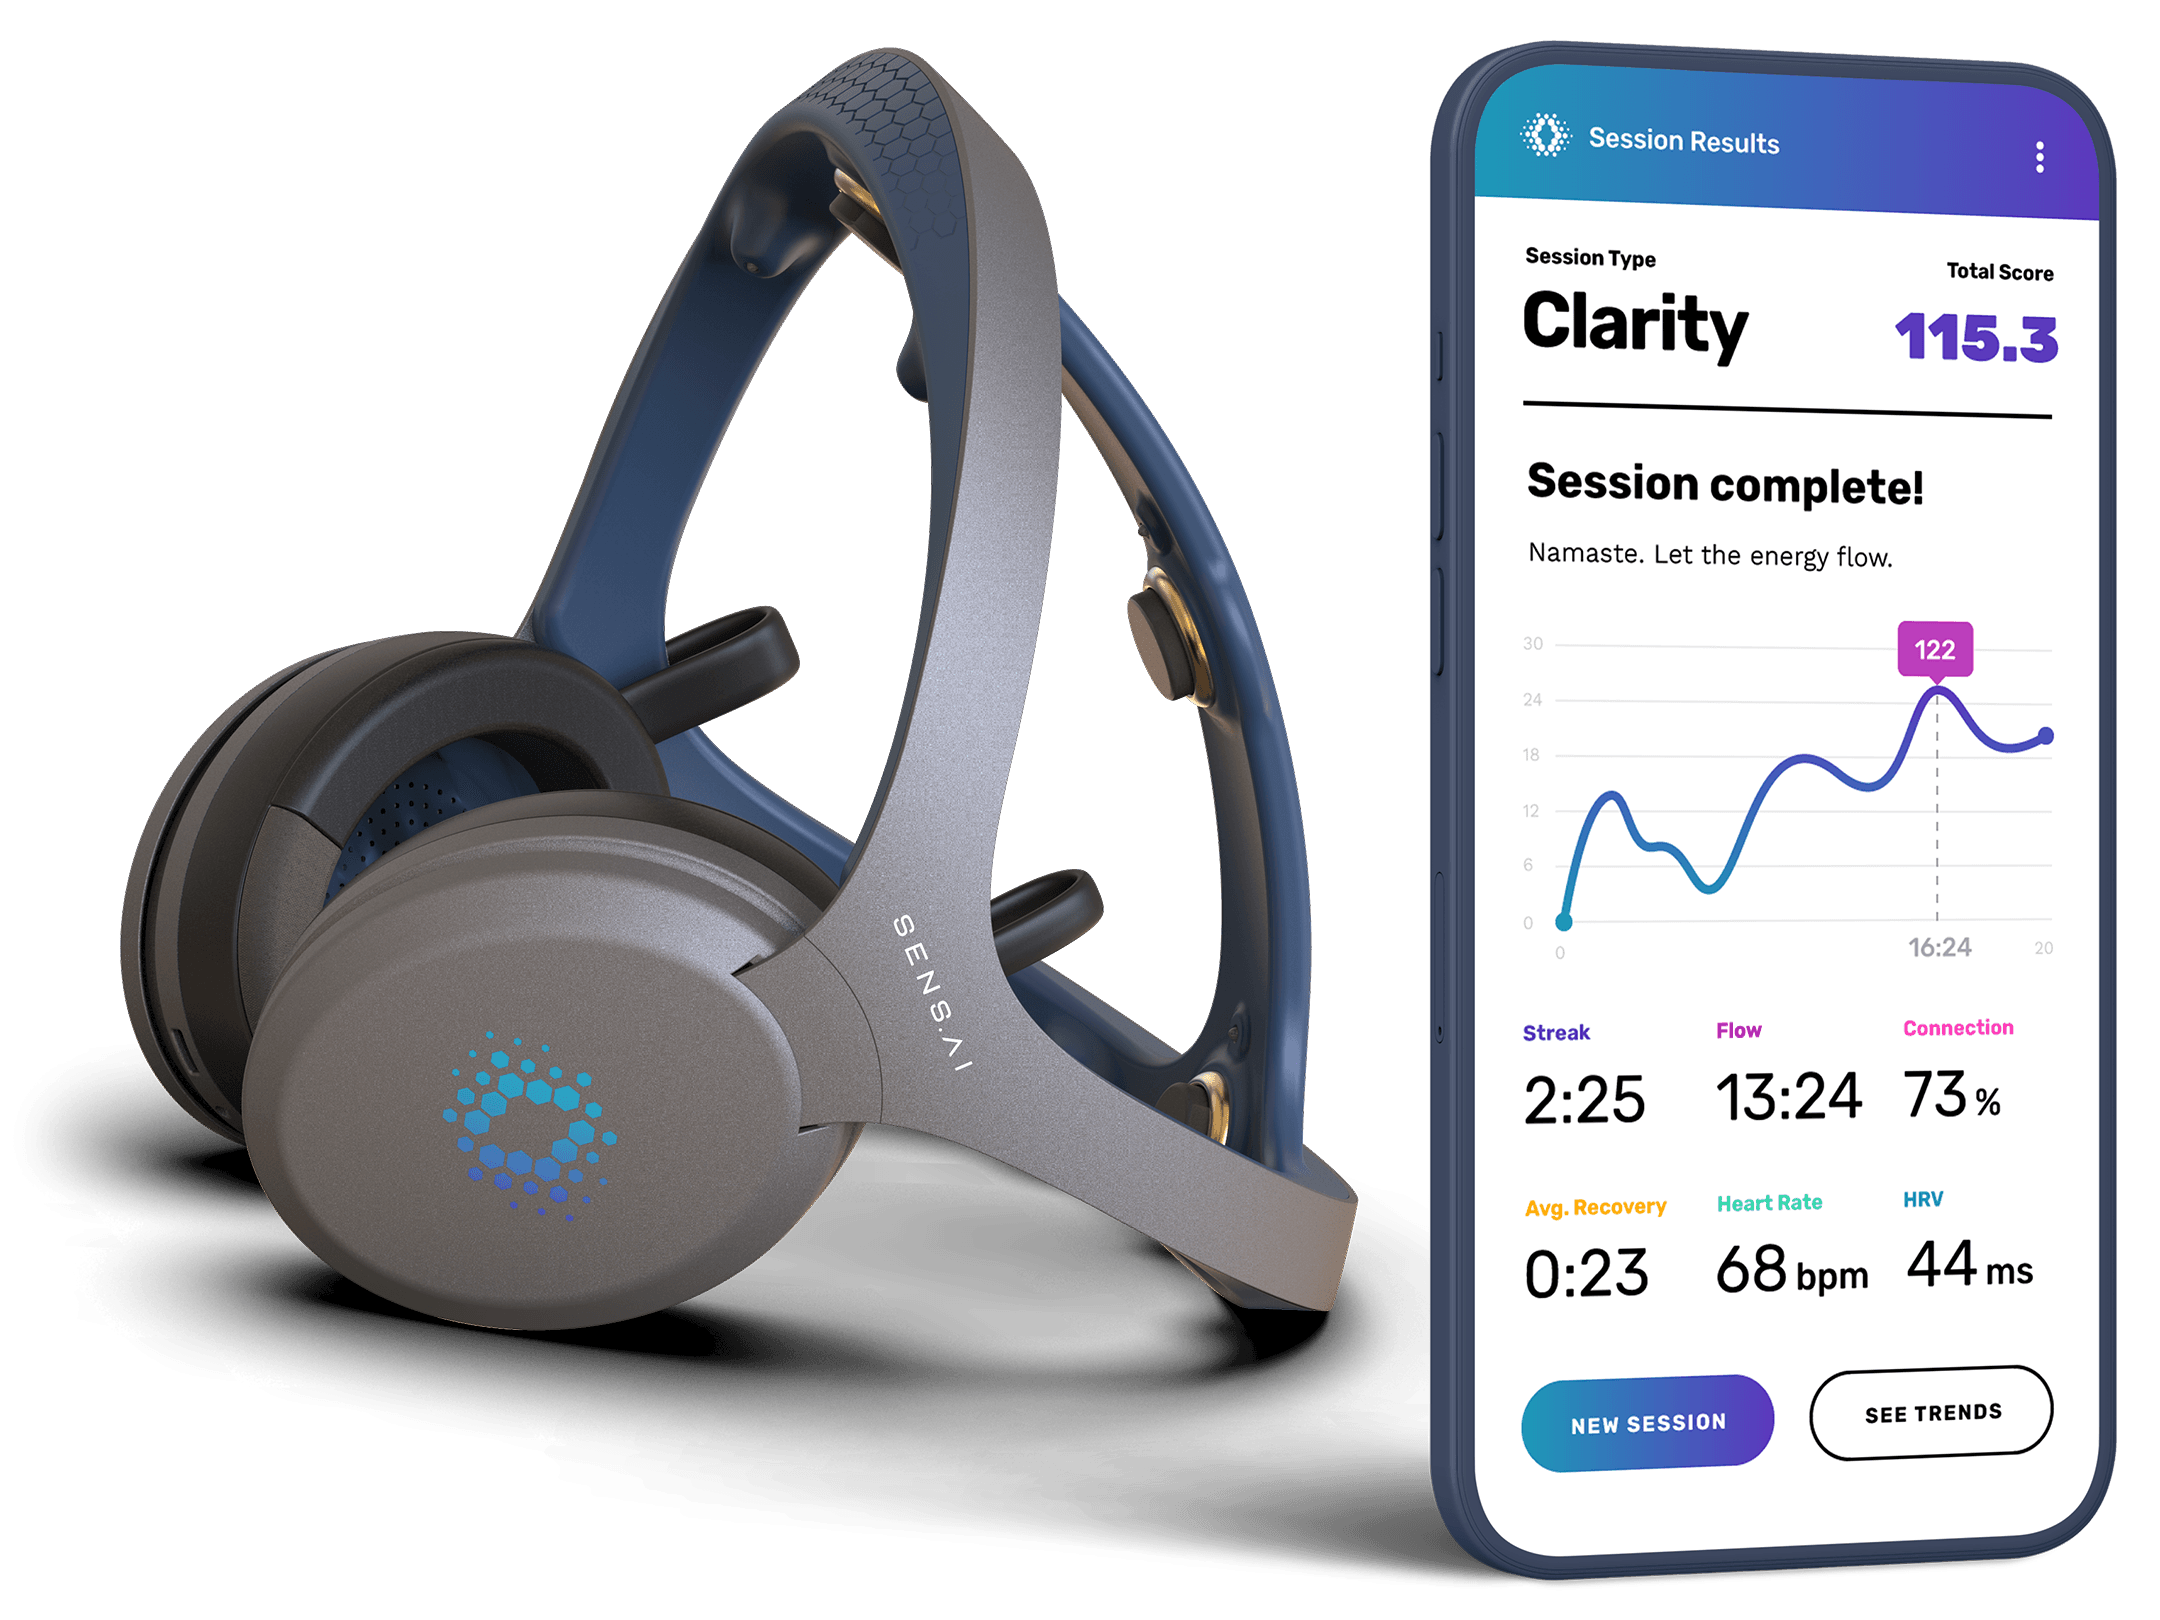 Sens.ai headset and mobile app showing Clarity session results including overall score, heart rate, and HRV